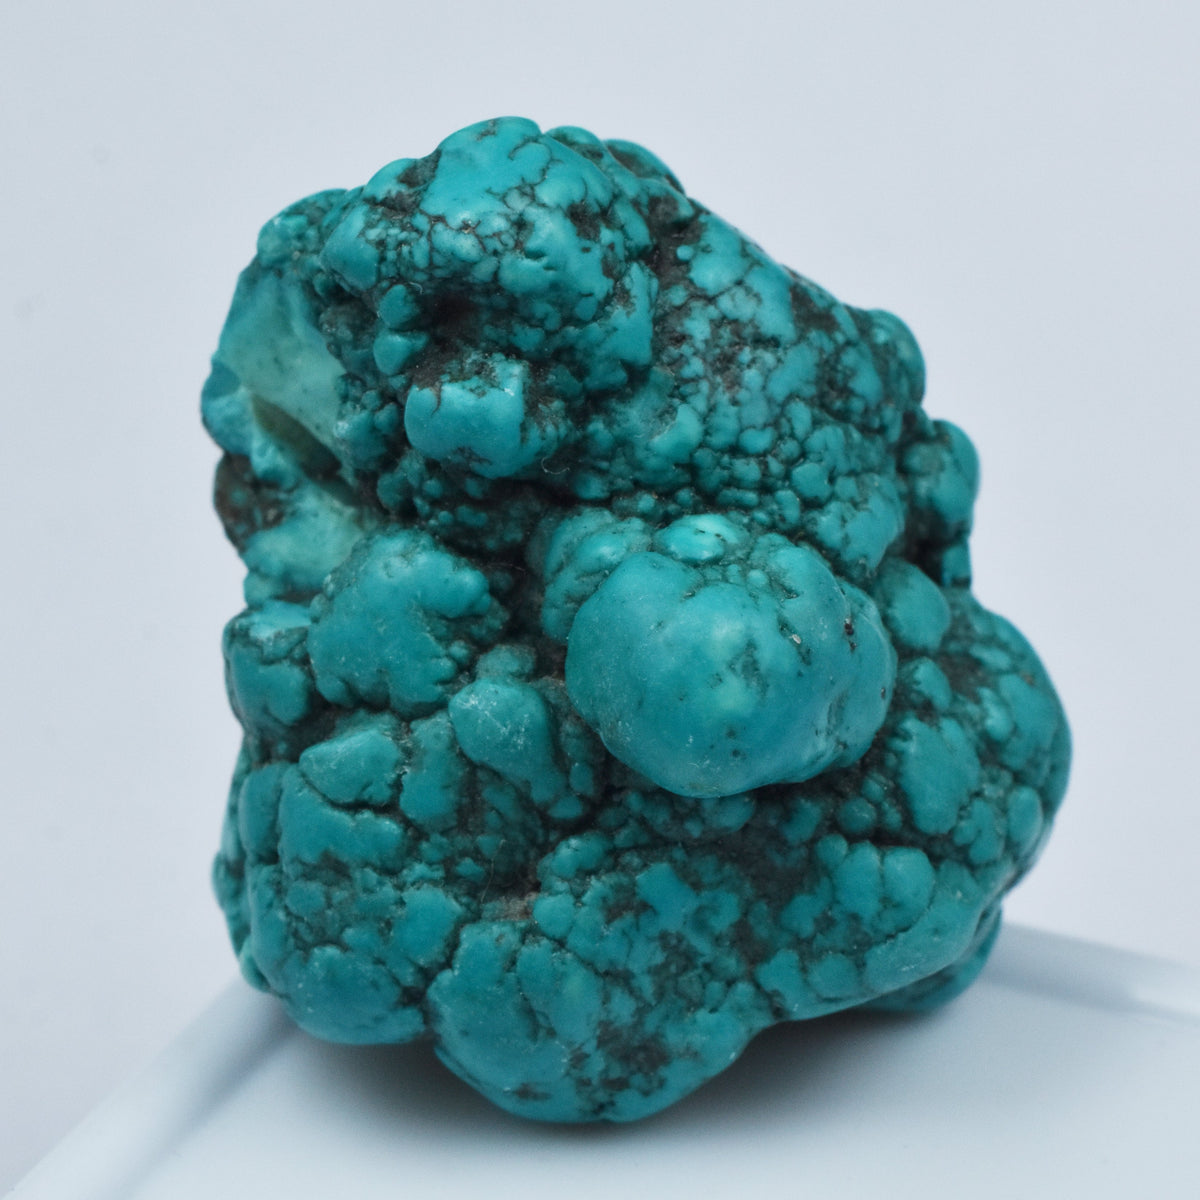 Exclusive Piece 500-550 Carat Sky Blue Turquoise Natural Loose Gemstone Rough Certified Turquoise Rough Raw Gemstone Mineral Specimen Base Free Shipping Free Gift